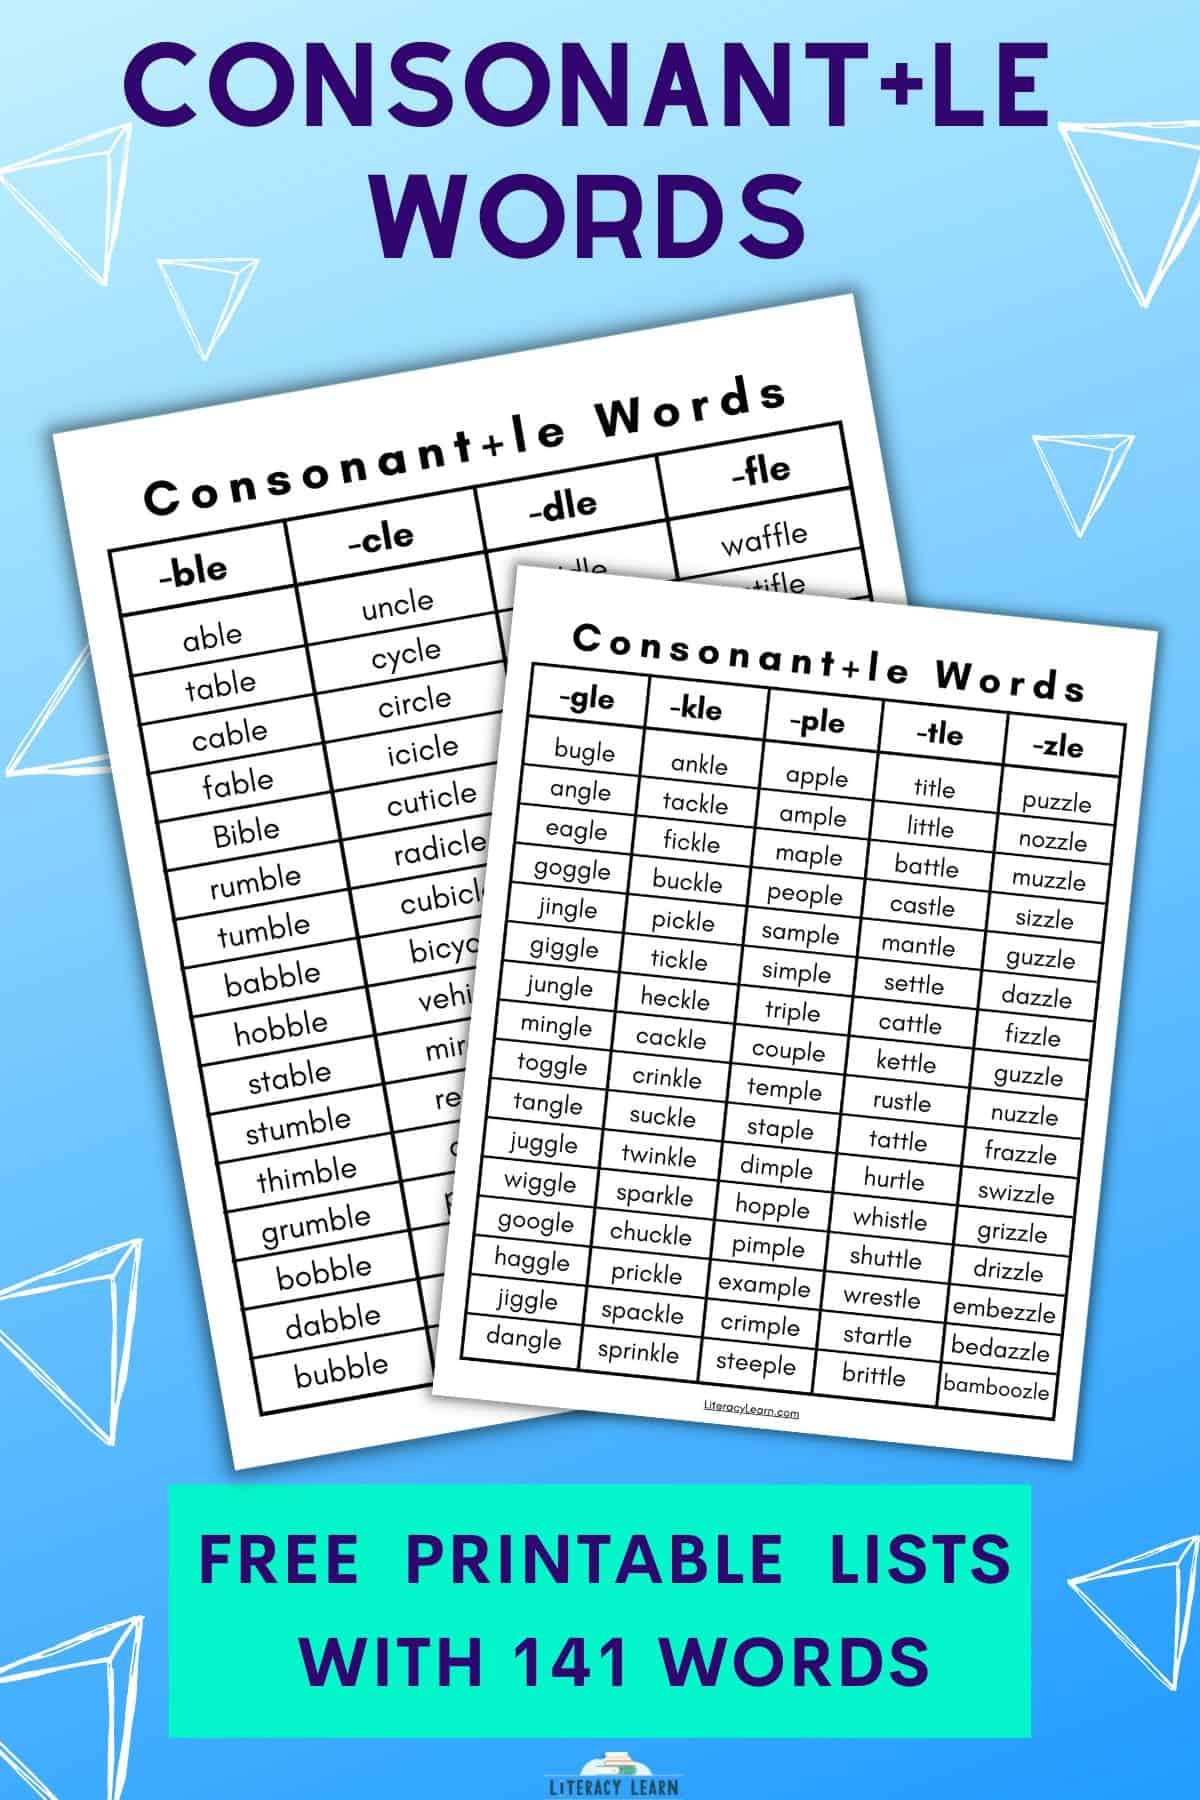 Blue background with two worksheets with title "Consonant+le Words: Free printable lists with 141 words."